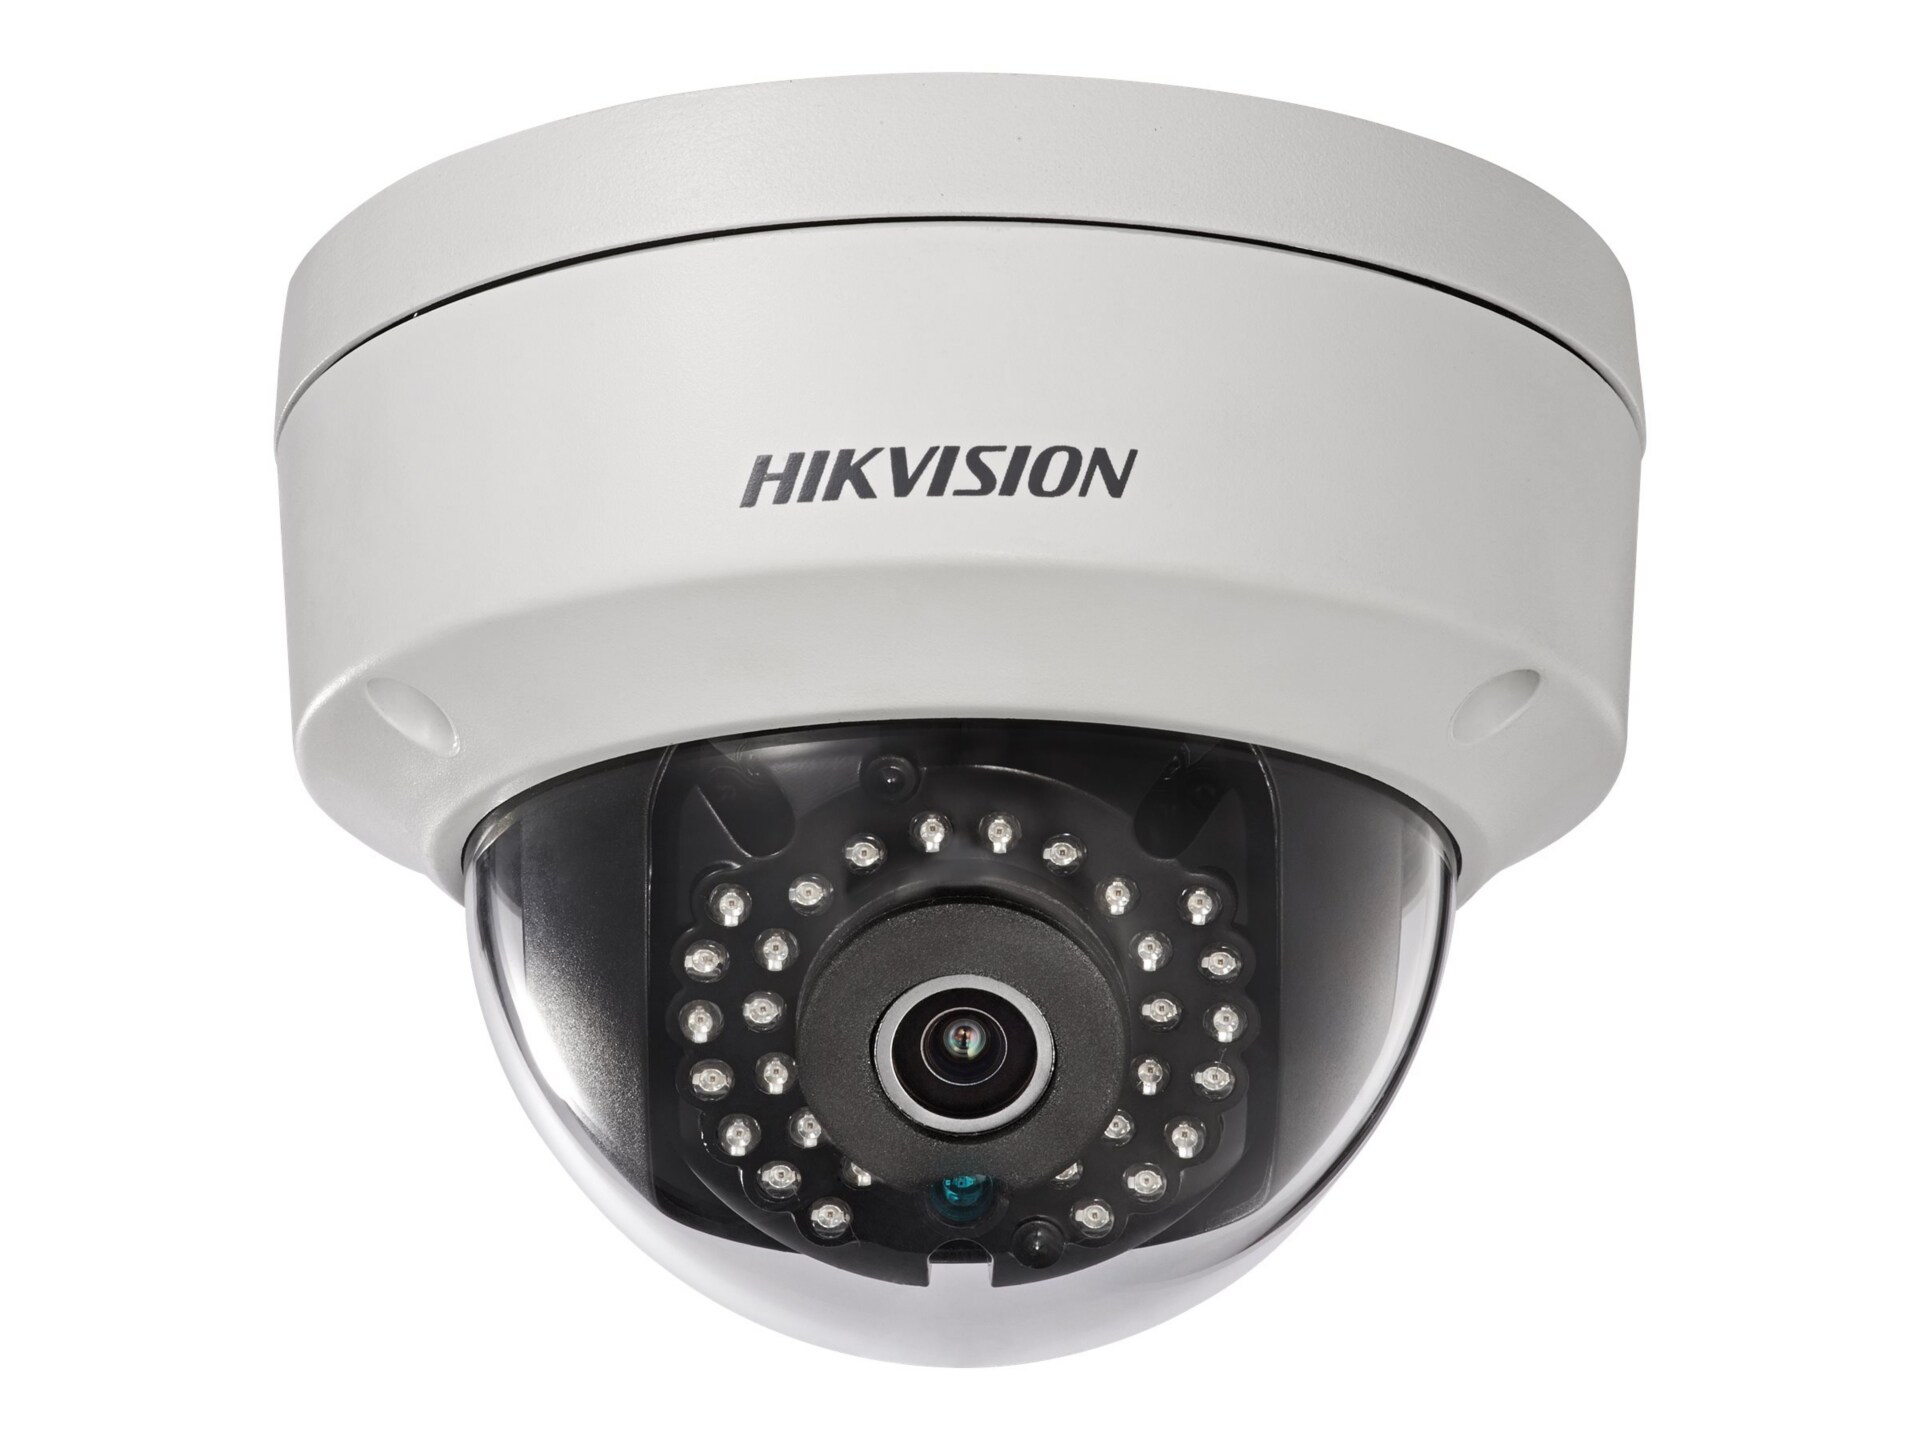 Hikvision DS-2CD2122FWD-IS - network surveillance camera